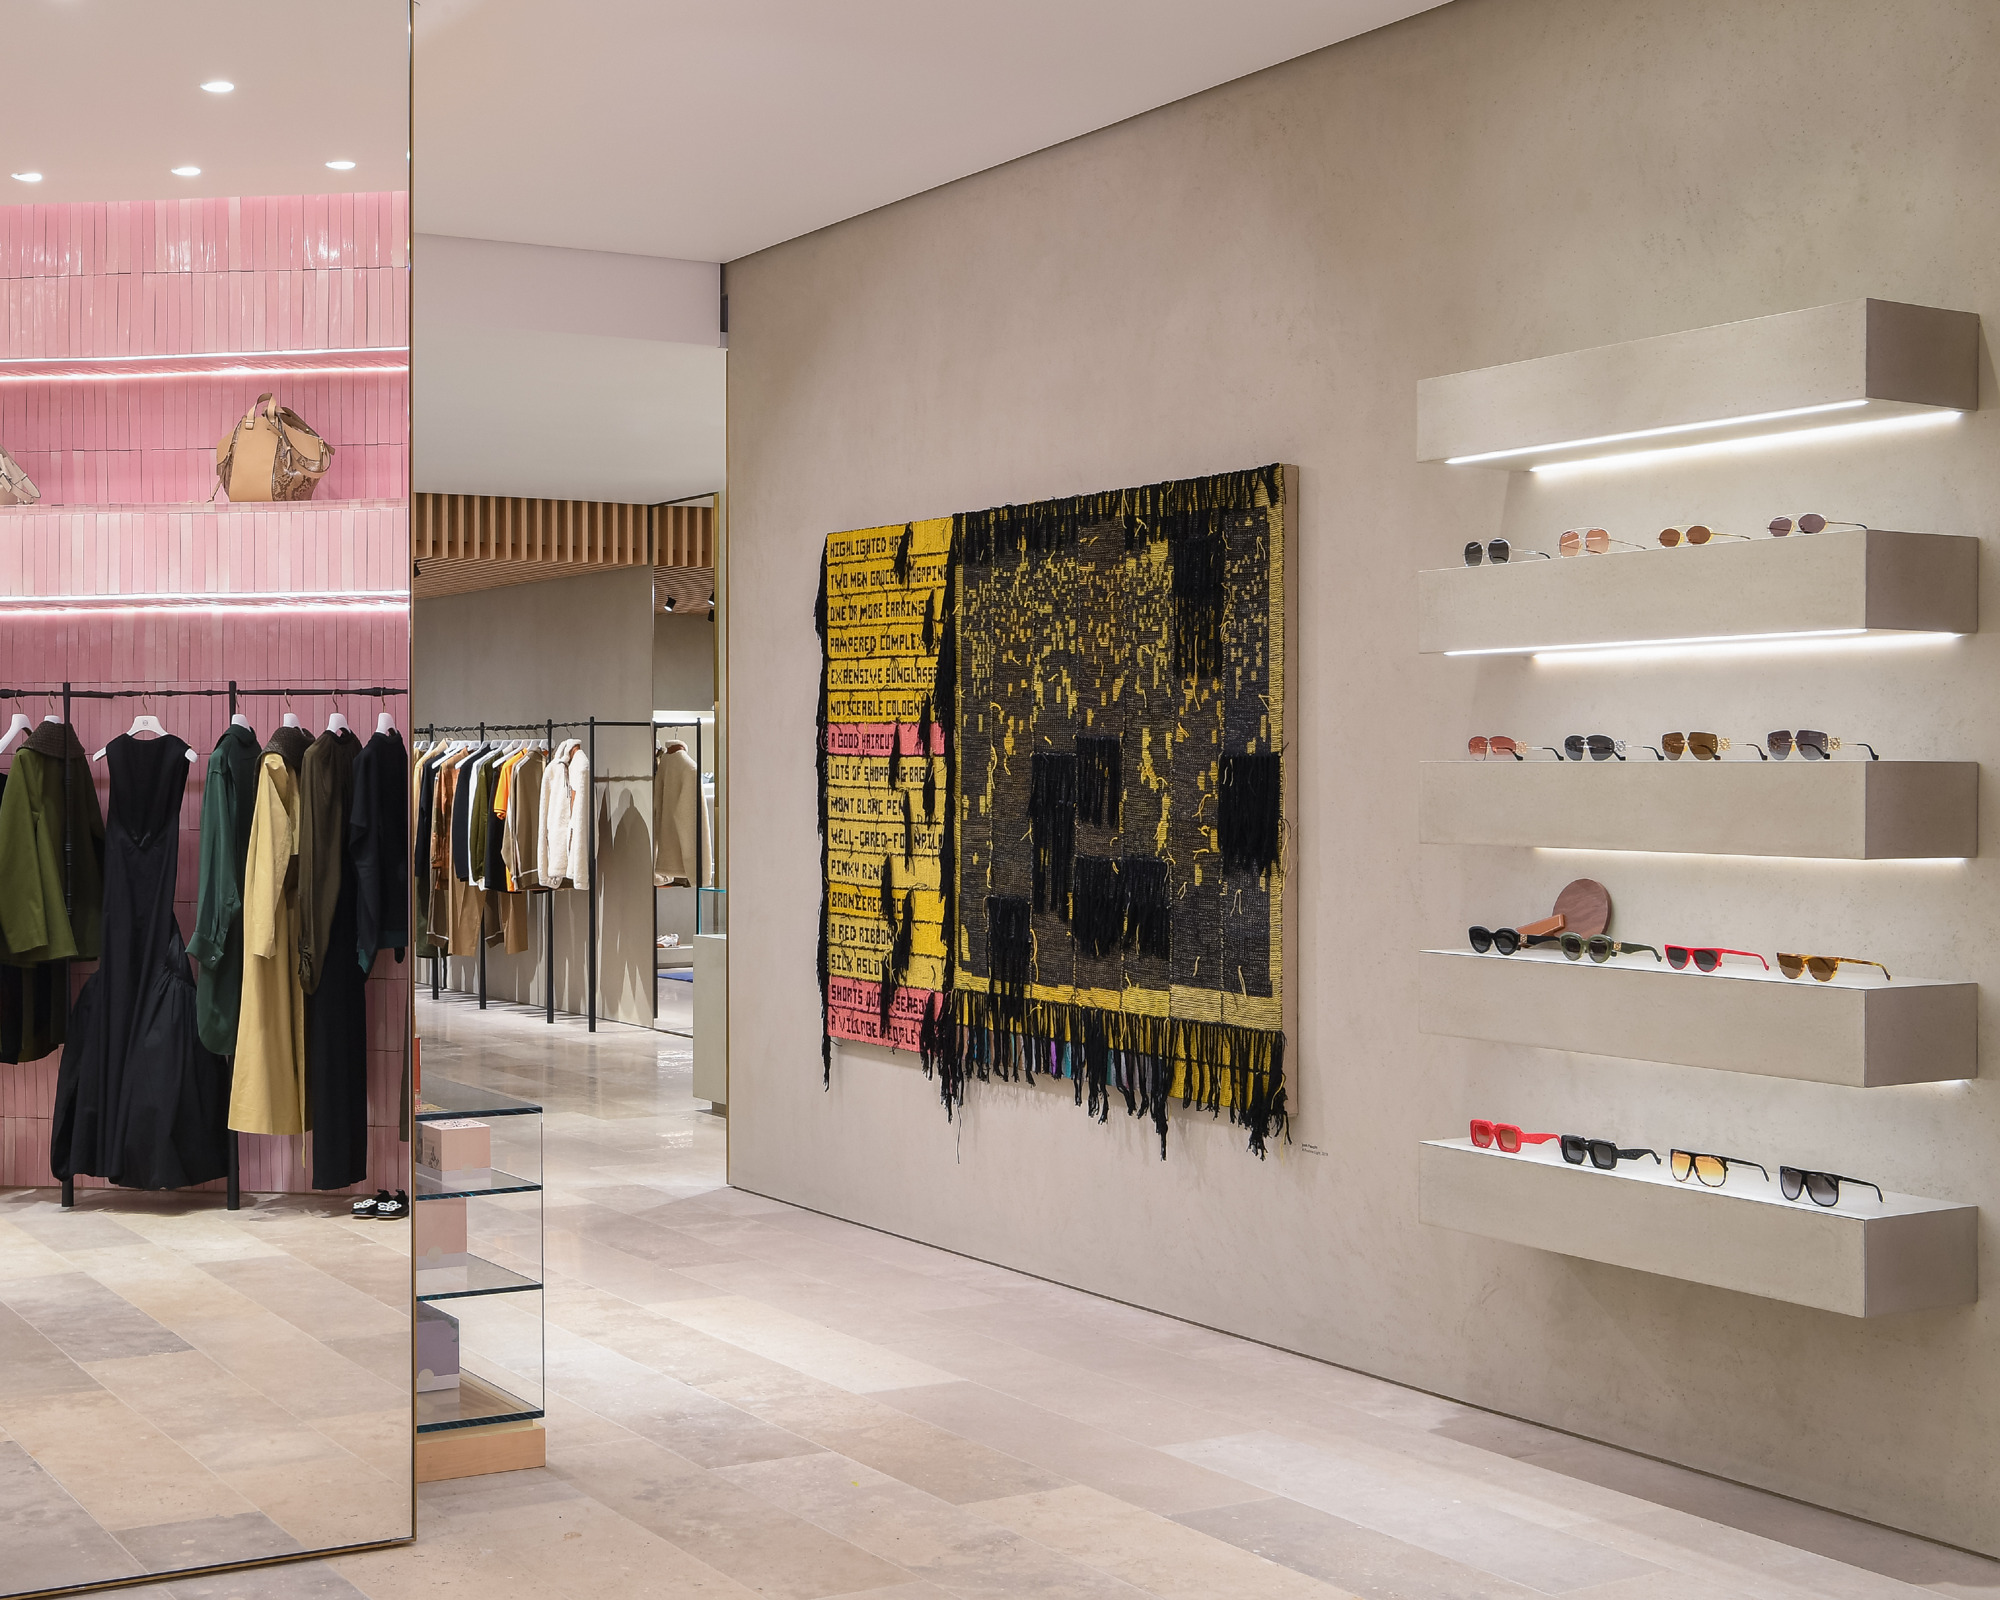 Largest Louis Vuitton boutique in South-East Asia